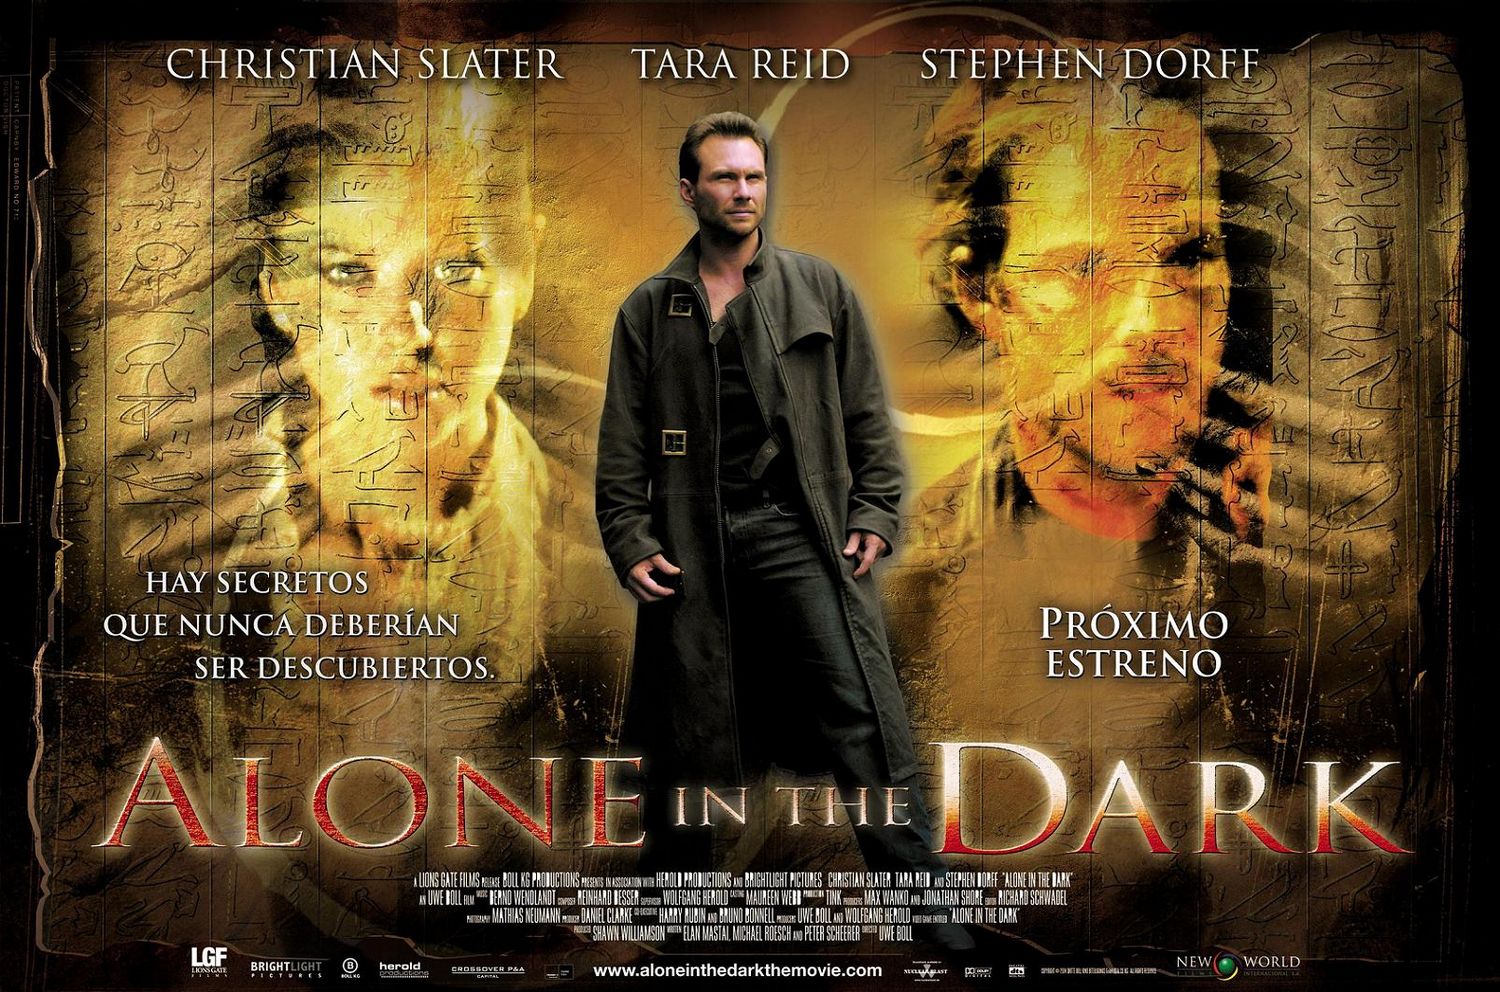 Alone in the Dark (3 of 4) Extra Large Movie Poster Image IMP Awards